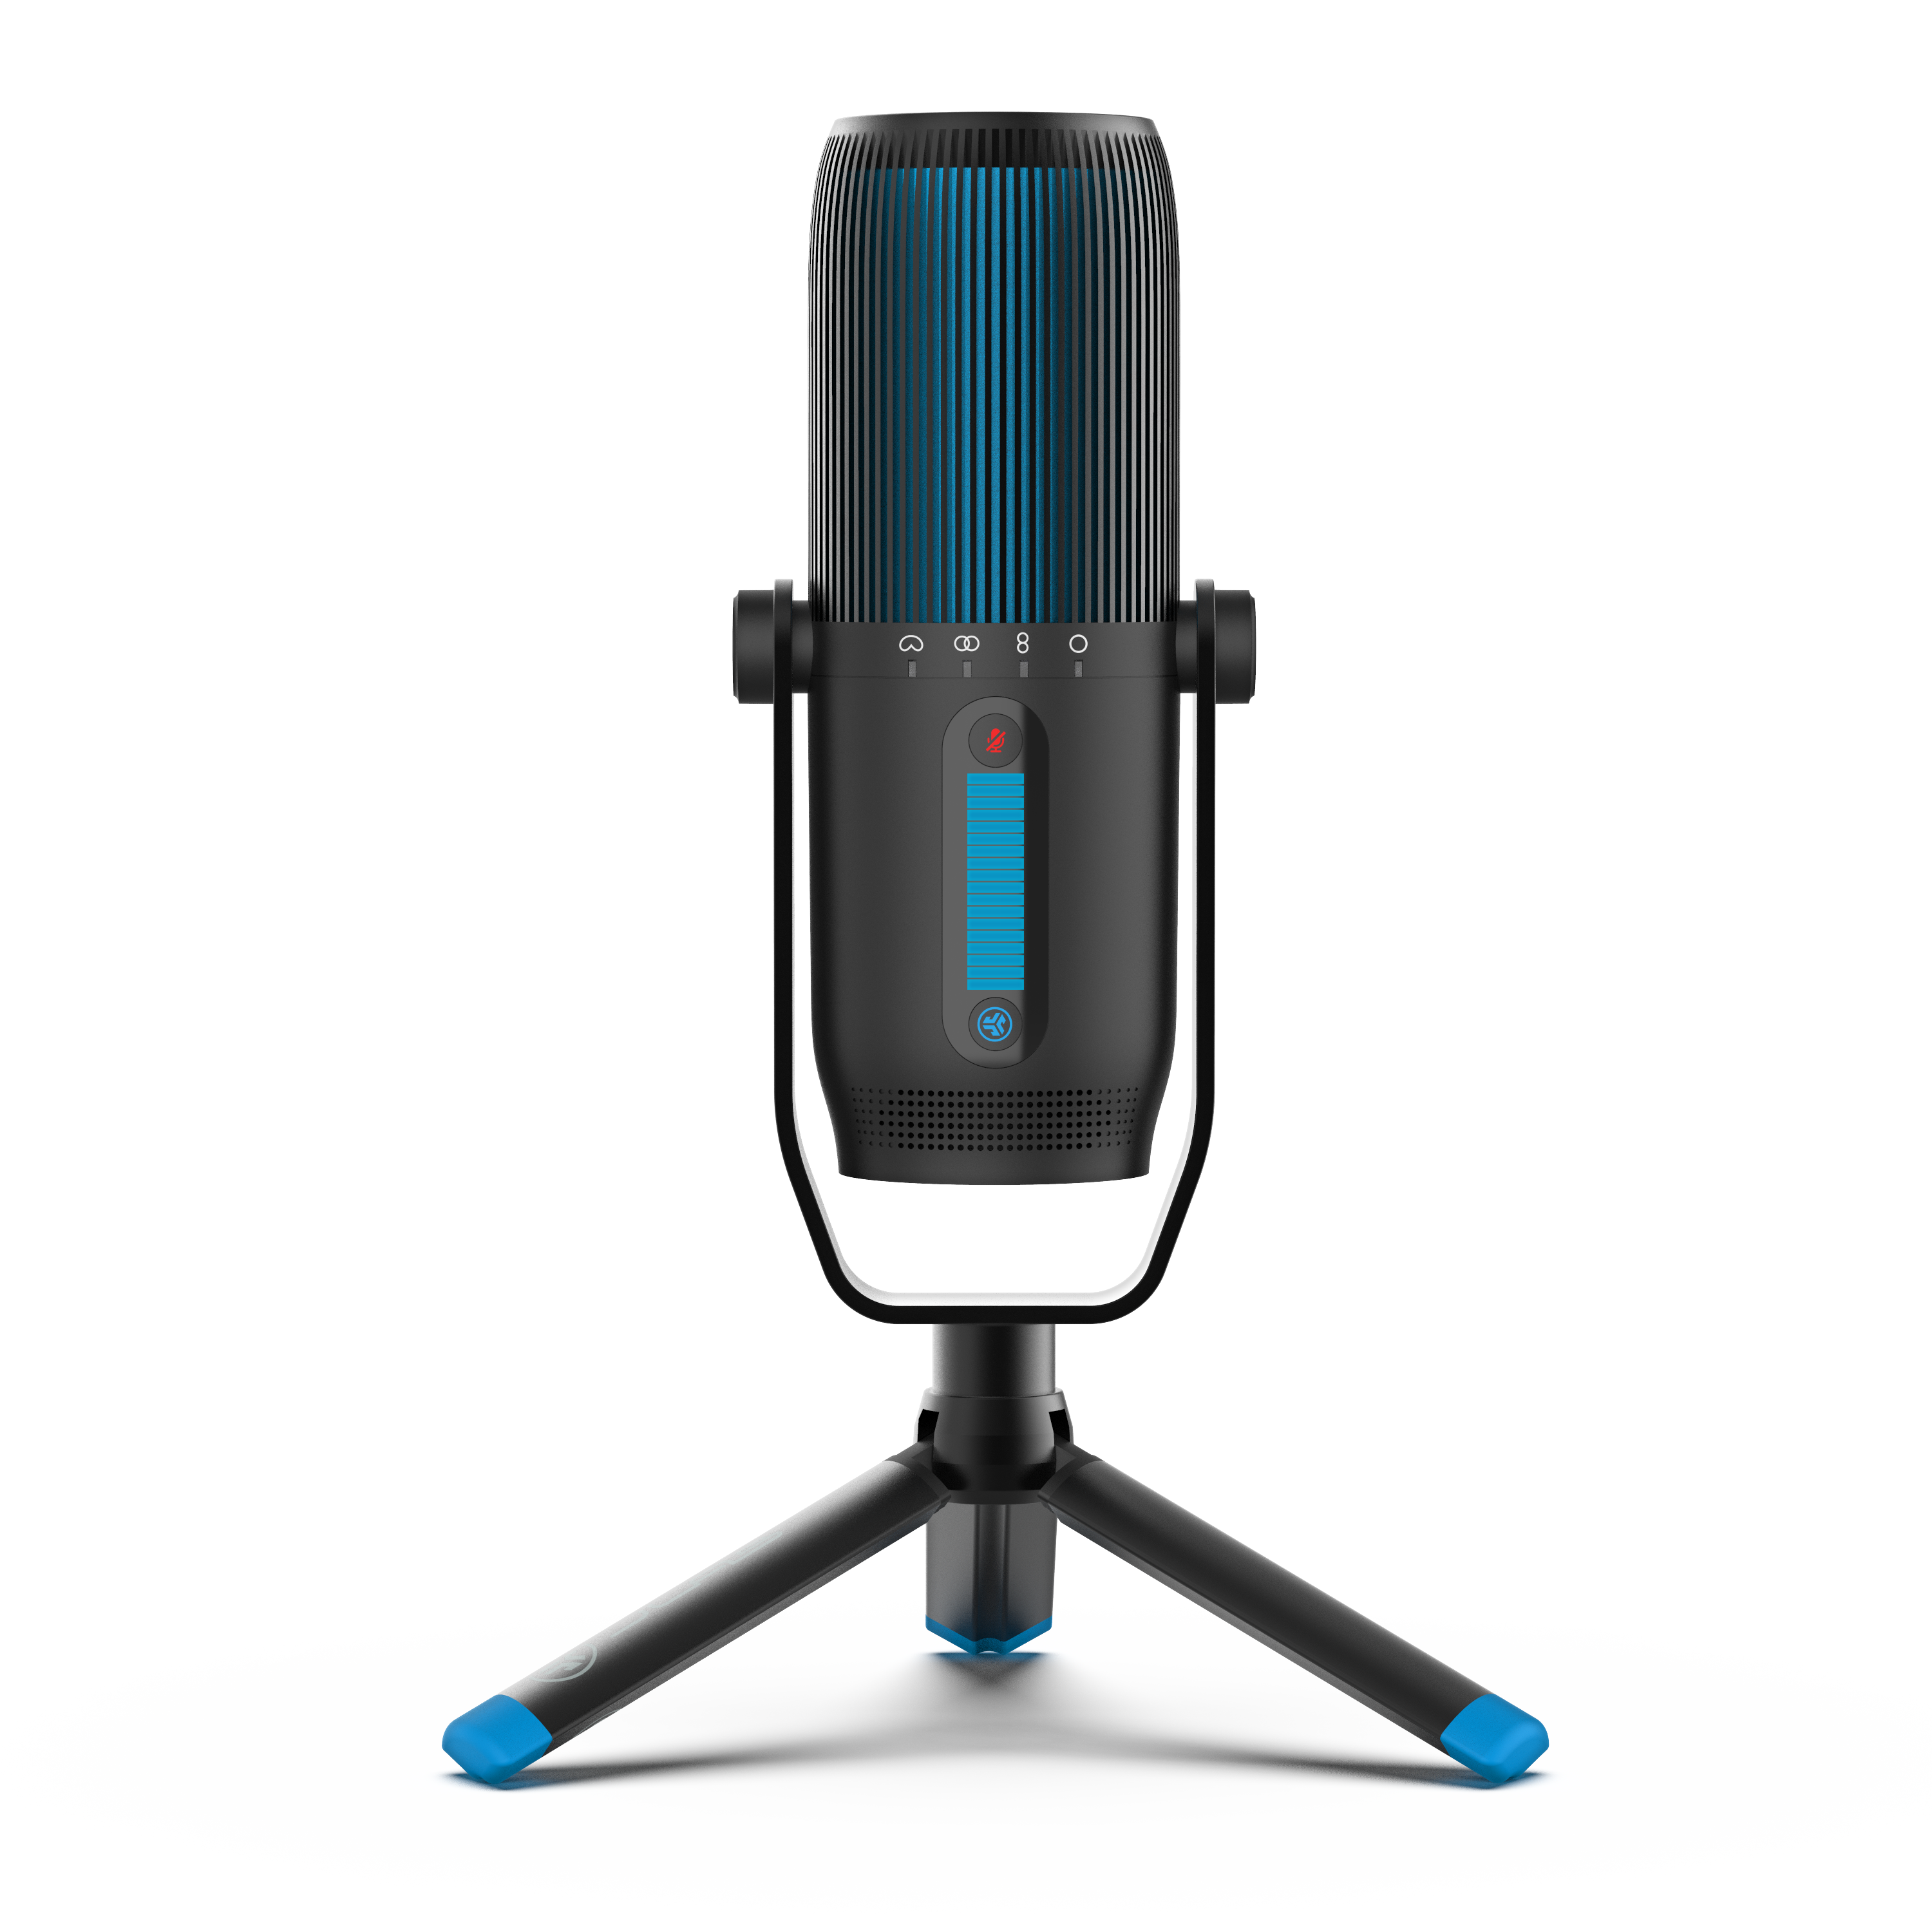 Expansion Microphones - Increase the audio coverage of your